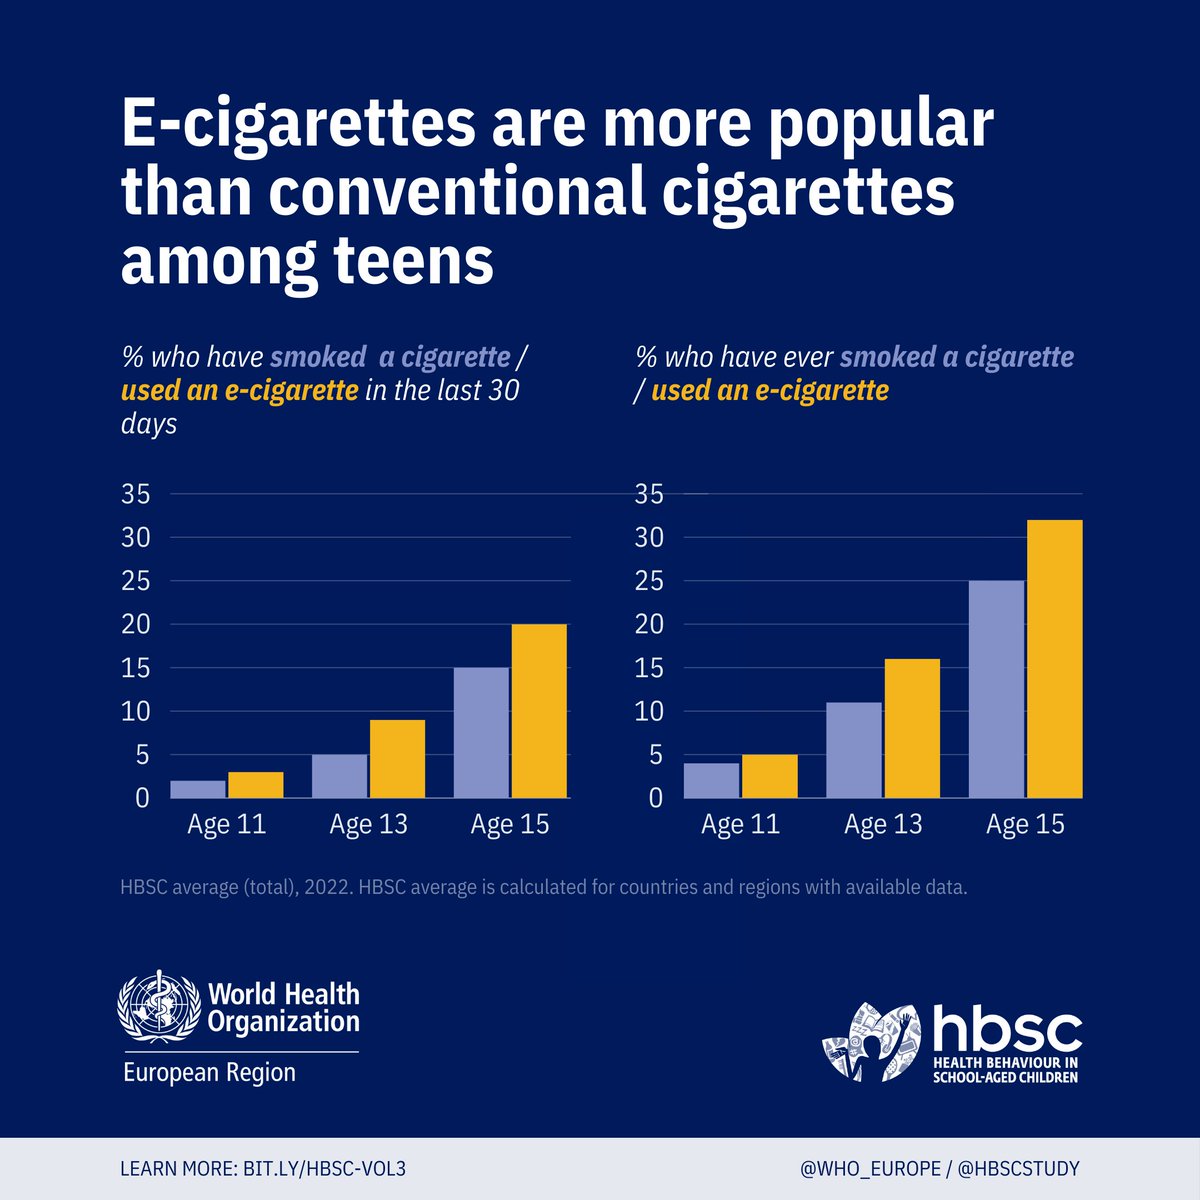 New @HBSCstudy & @WHO_Europe report reveals concerning trend: e-cigarette use surpasses conventional cigarette use among European adolescents. We must act to protect youth health. Read the full report: bit.ly/hbsc-vol3 #AdolescentHealth